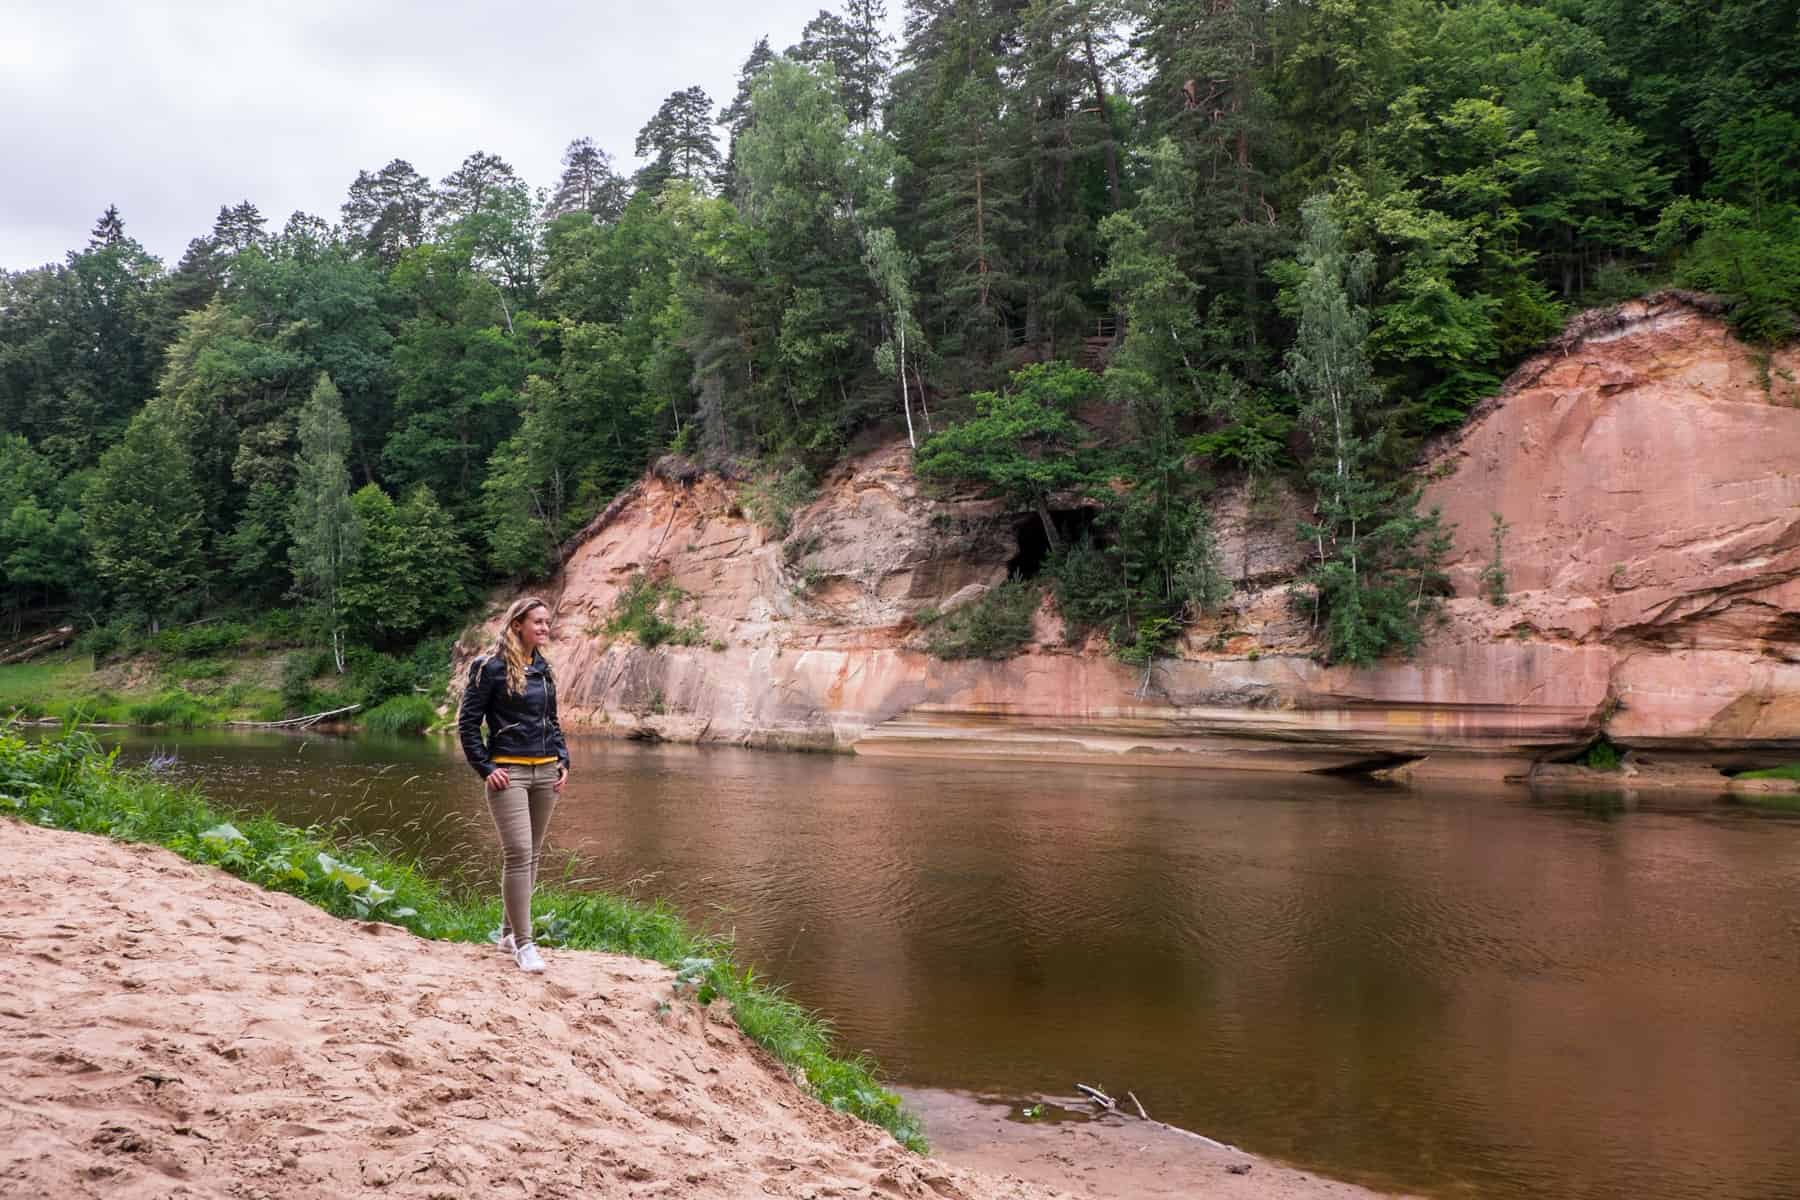 A woman in khaki pants and a black jacket stands on a sandy riverbank looking towards an ochre red cave under a green forest.